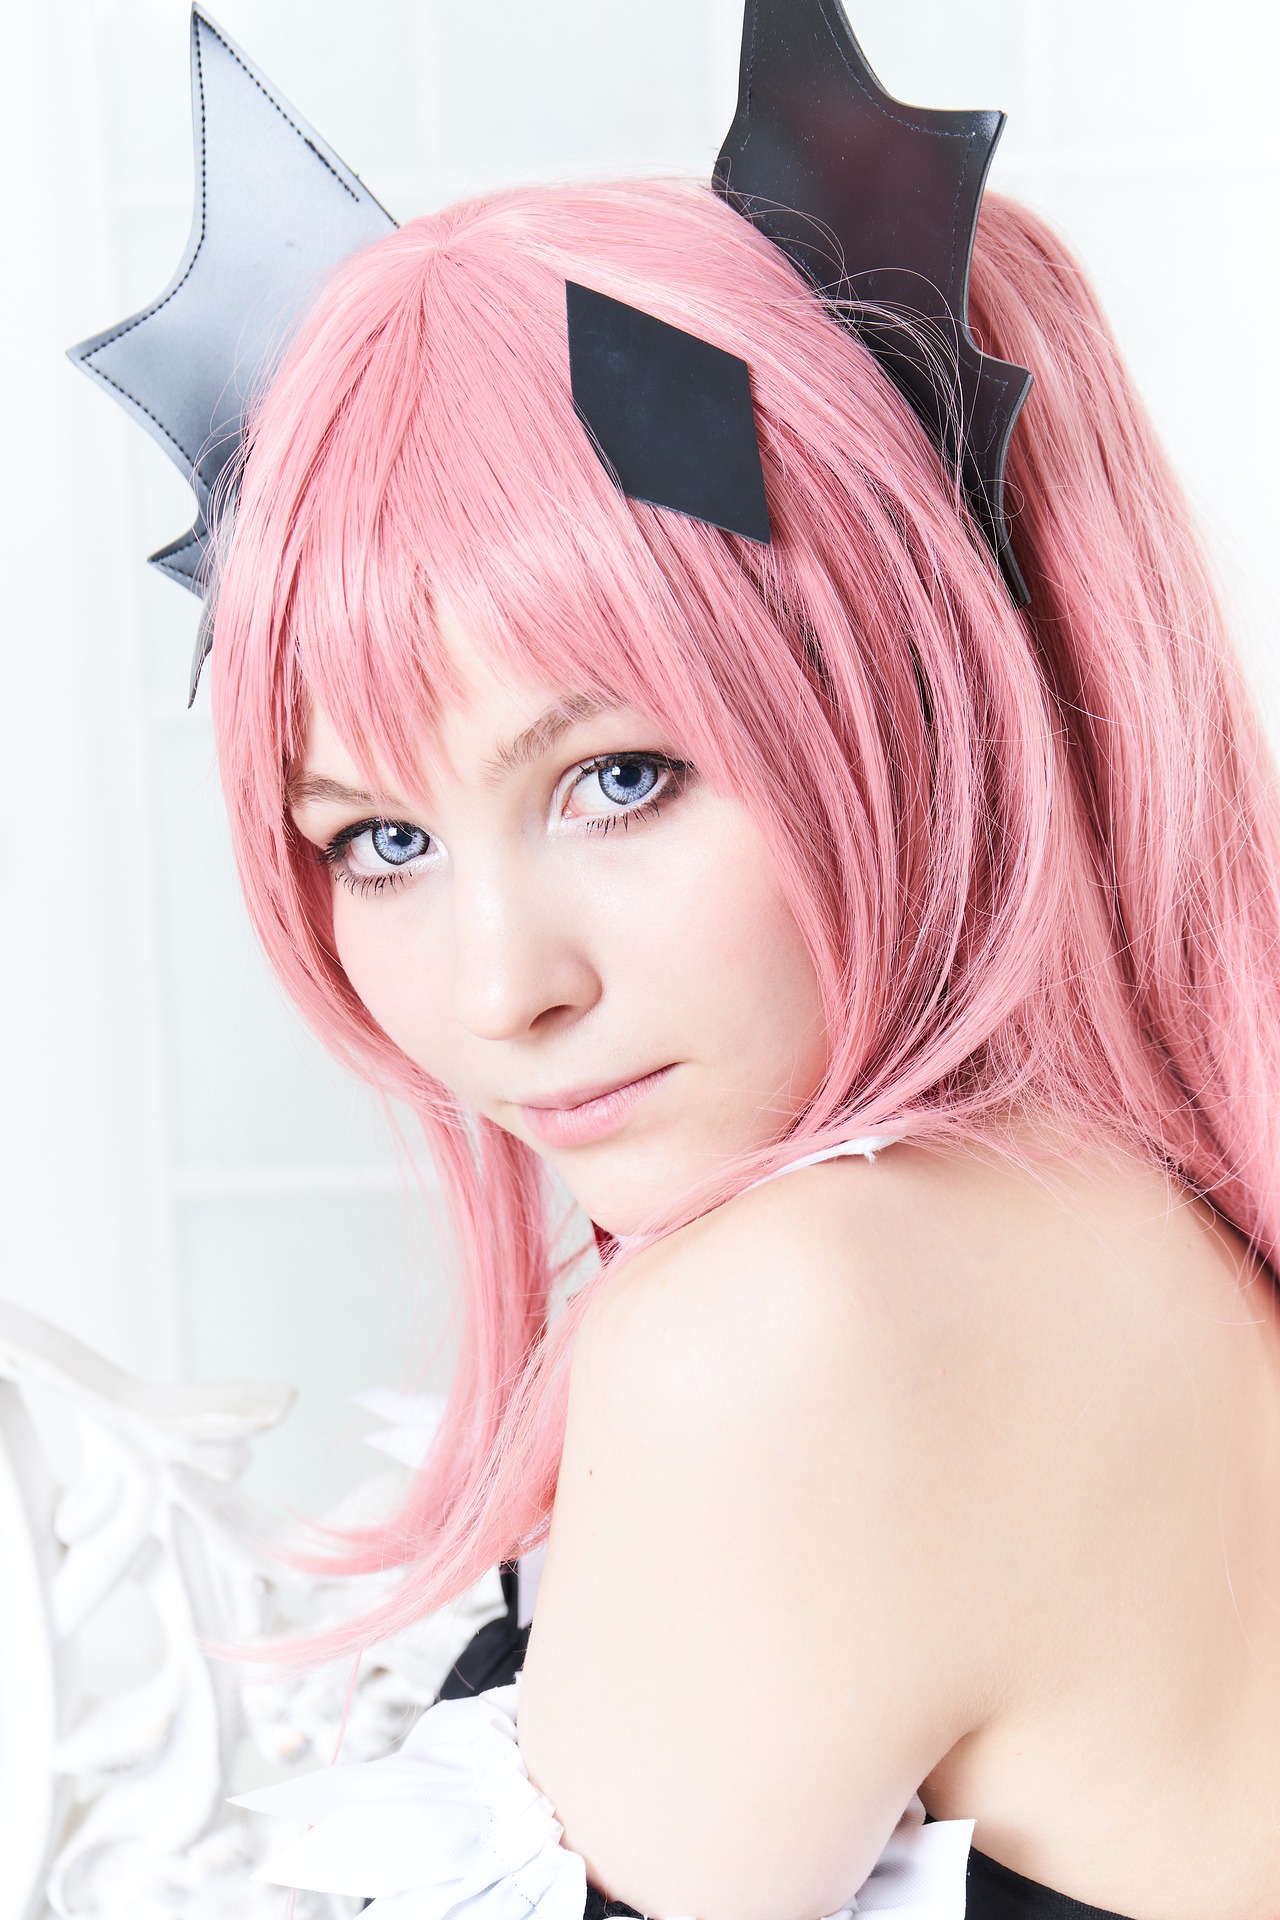 Teenage girl in cosplay with pink wig